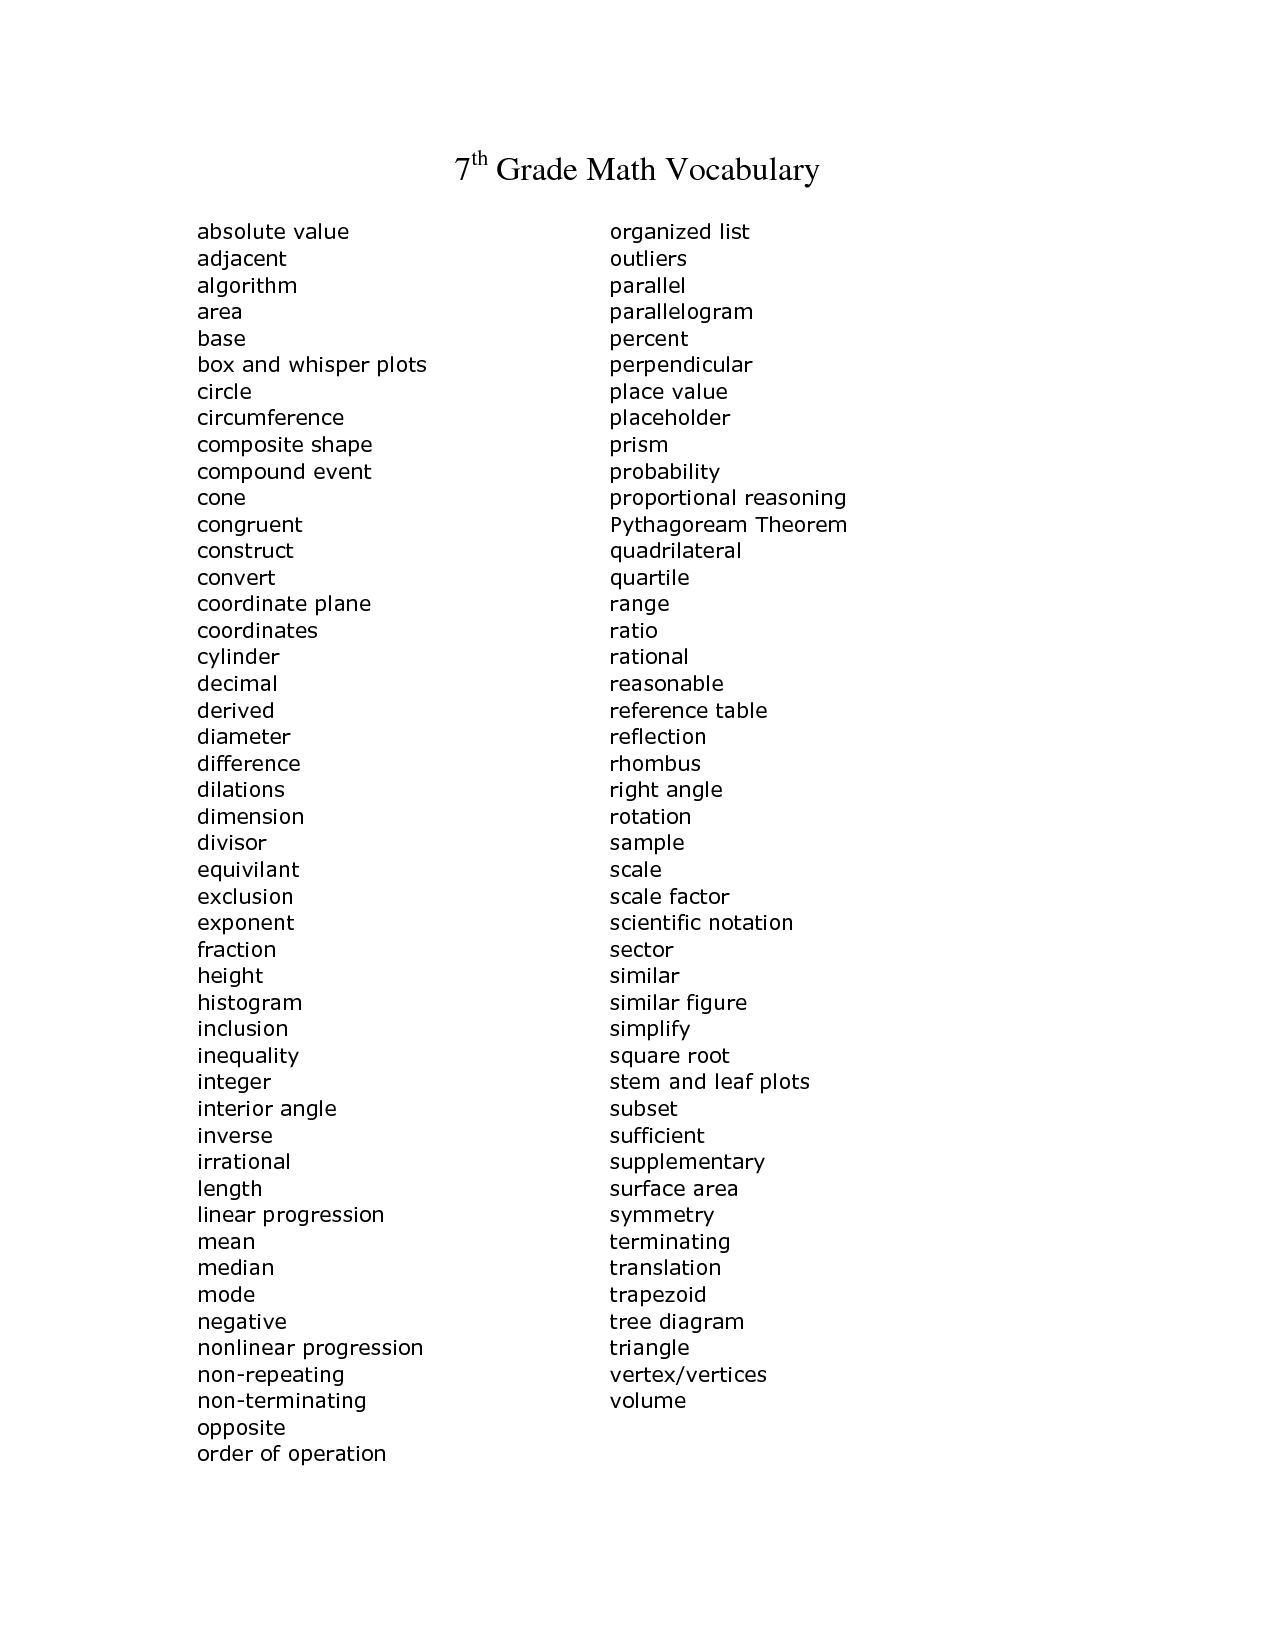 15-best-images-of-7th-grade-root-words-worksheets-7th-grade-spelling